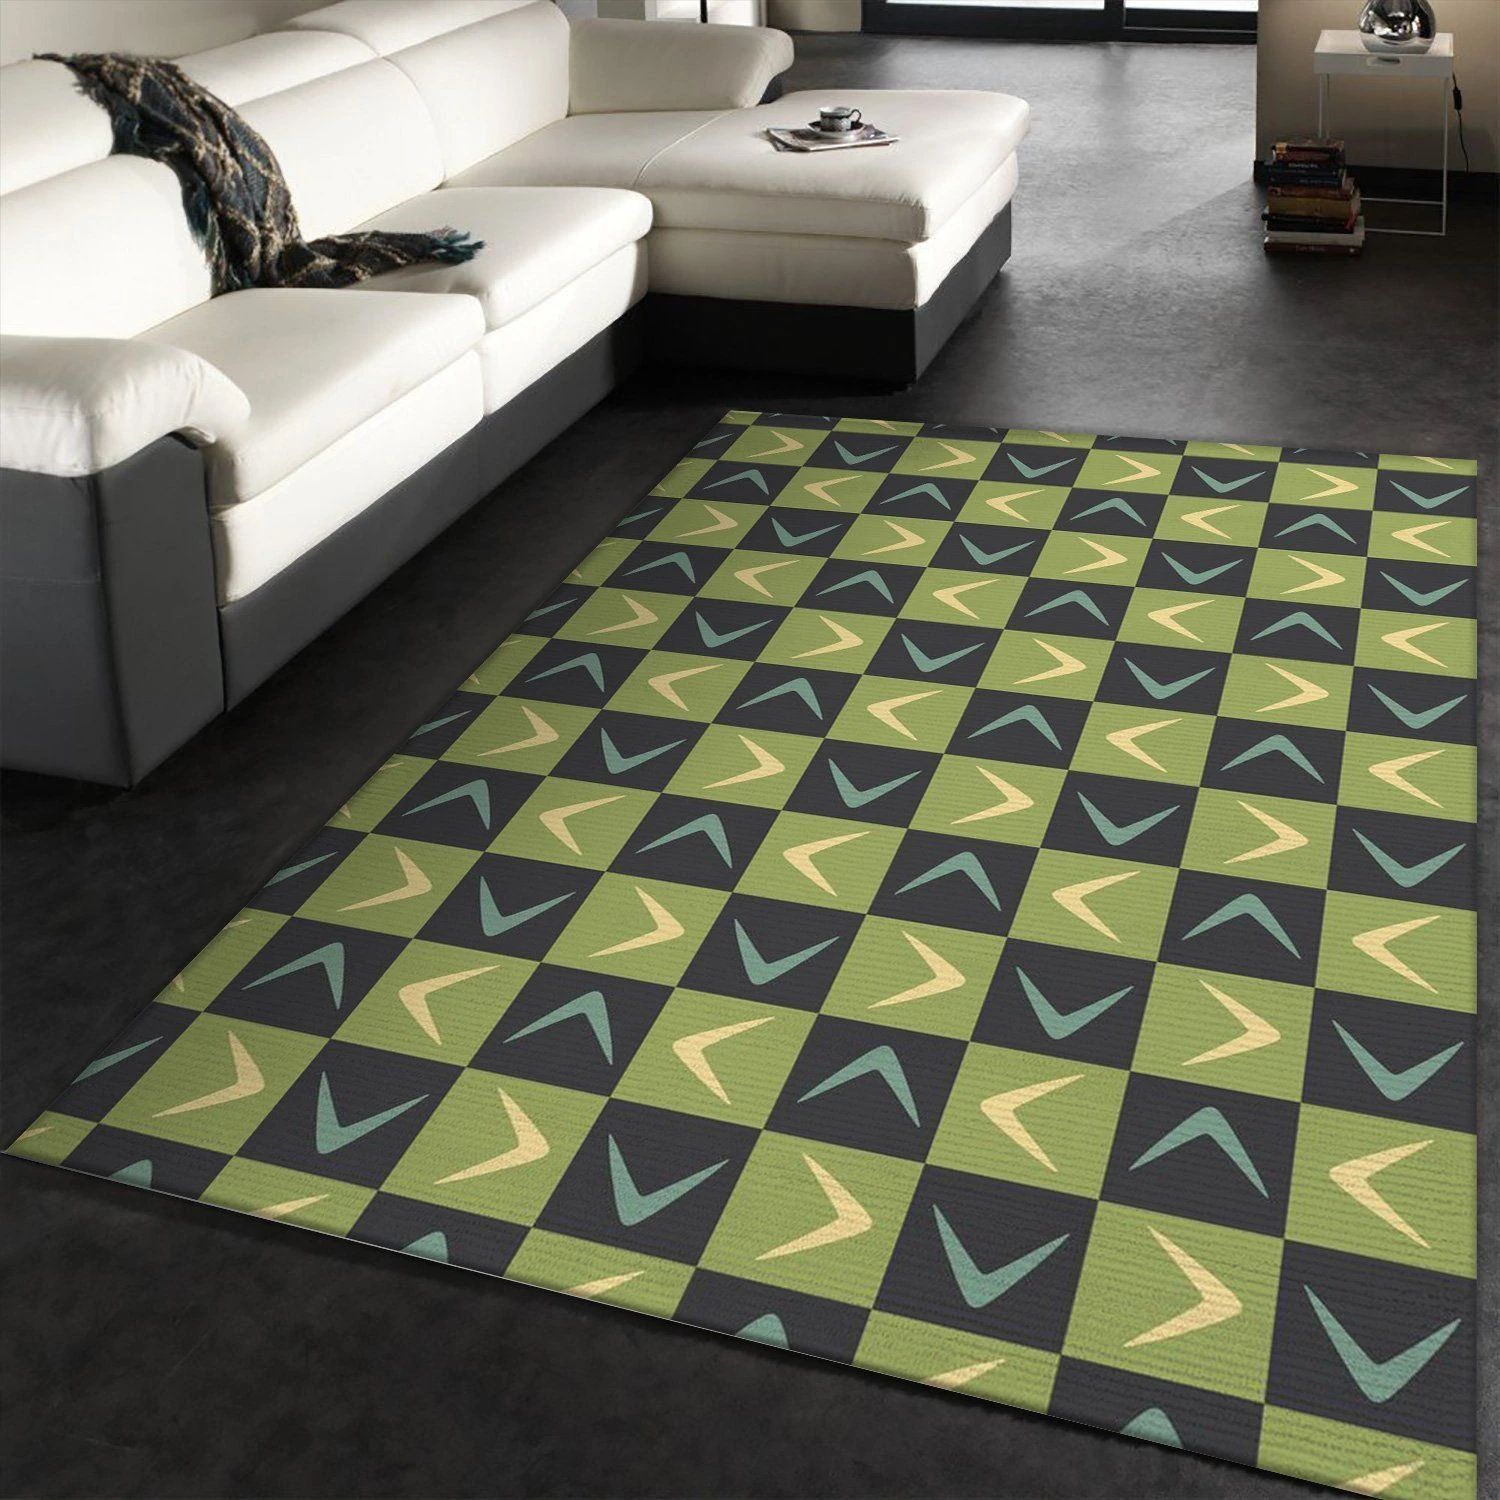 Midcentury Pattern 39 Area Rug For Christmas, Bedroom, Home US Decor - Indoor Outdoor Rugs